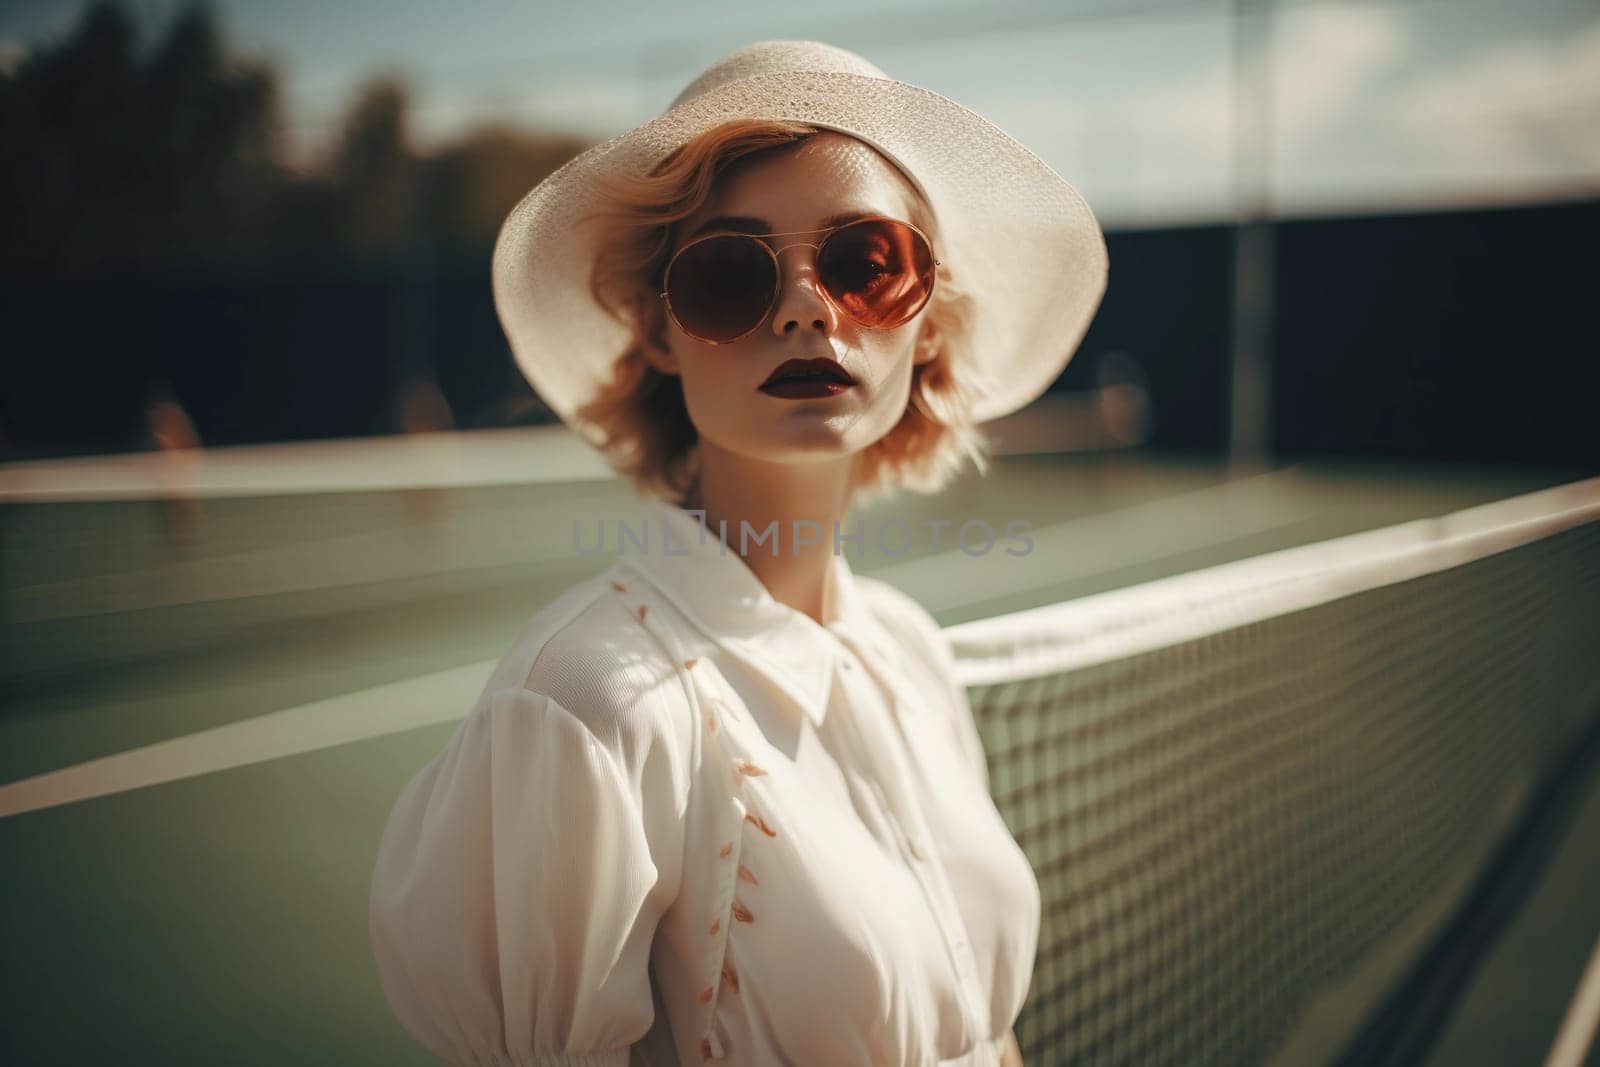 A woman wearing sunglasses and a hat stands on a tennis court. AI generation by gulyaevstudio